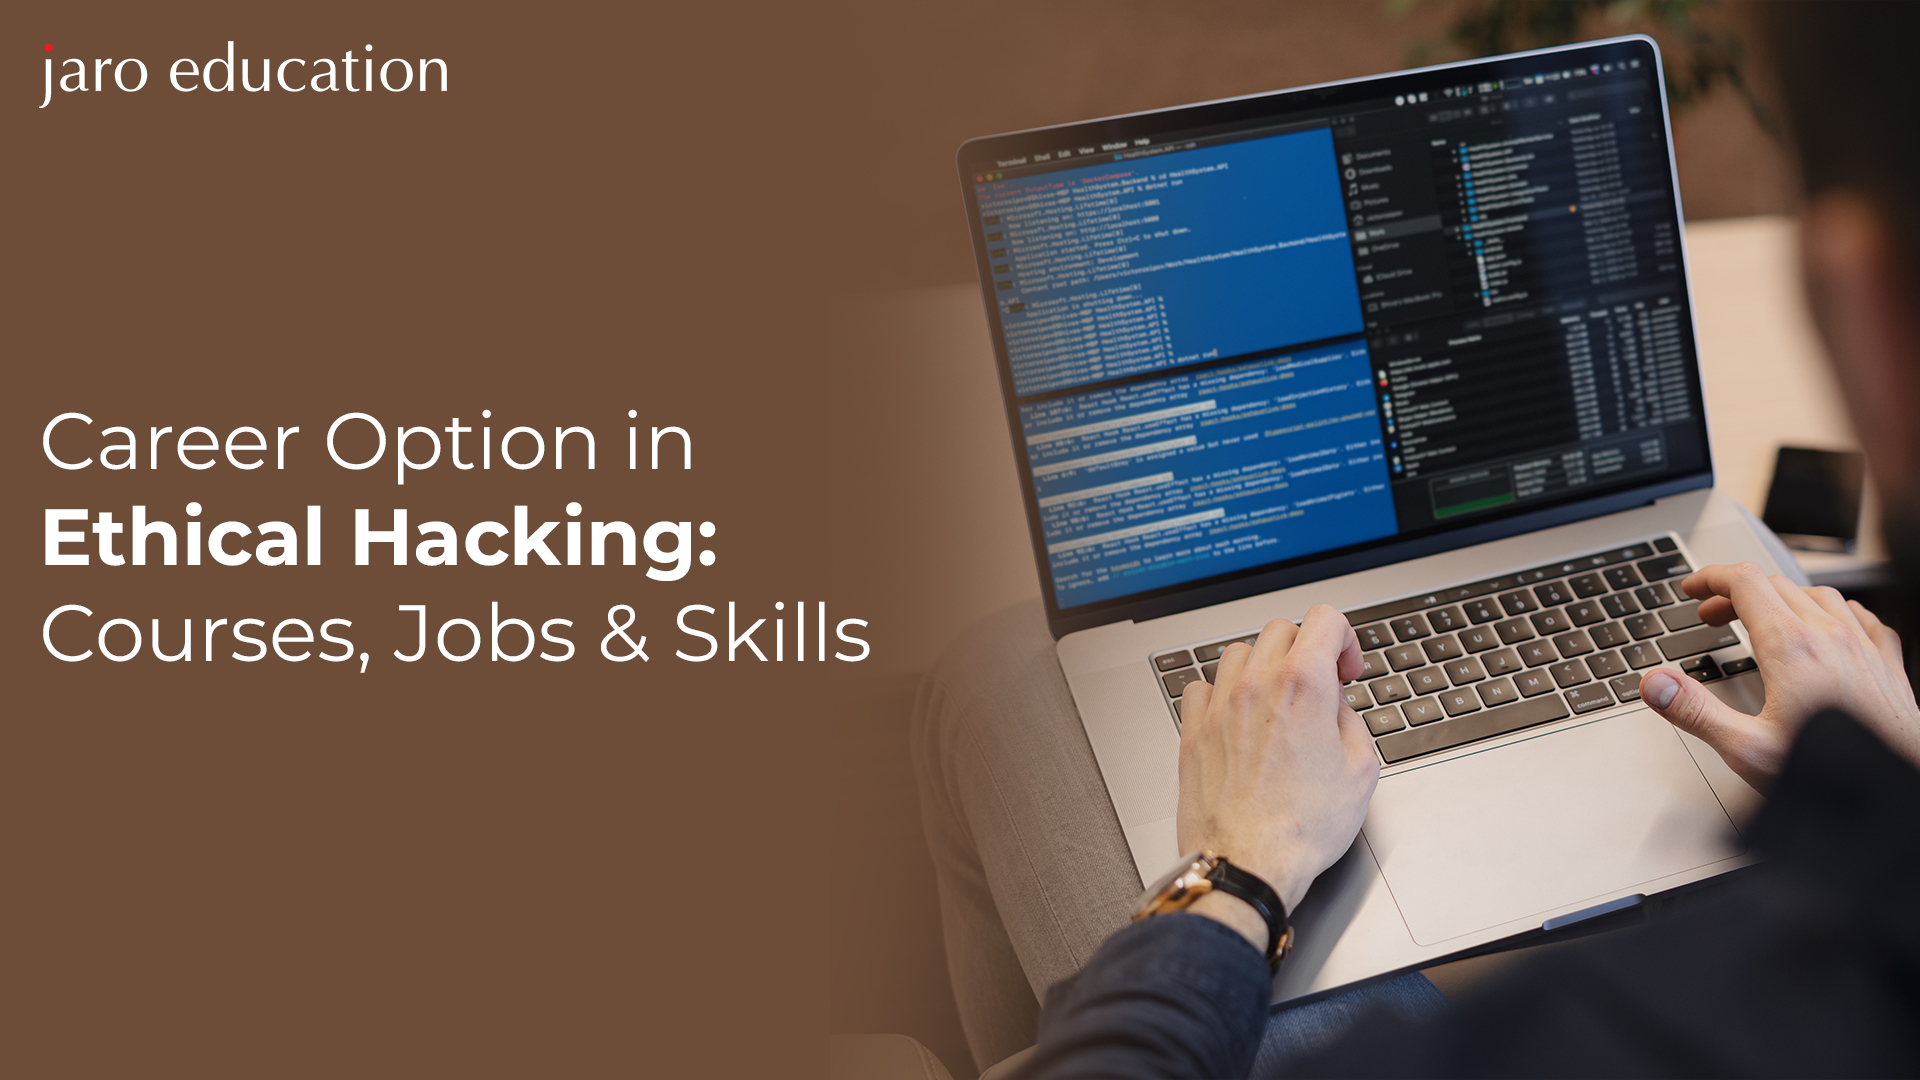 Career Option in Ethical Hacking Courses, Jobs & Skills blog